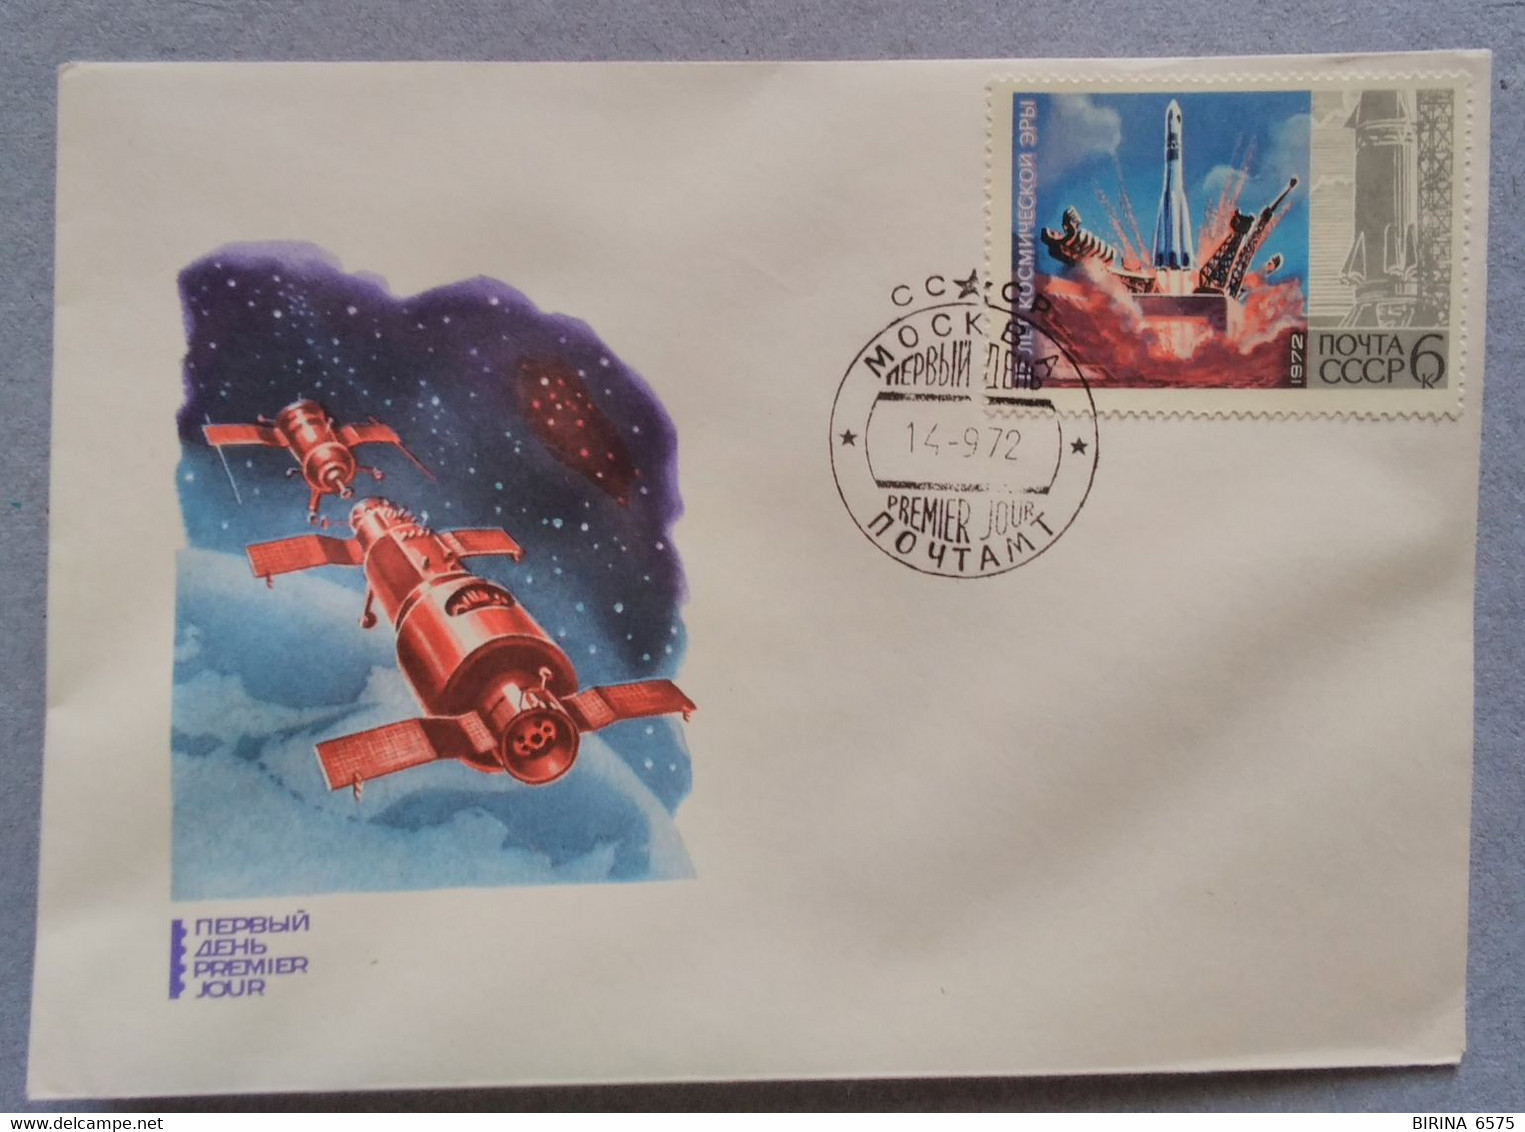 Astronautics. Cosmos. First Day. 1972. Stamp. Postal Envelope. The USSR. - Collezioni